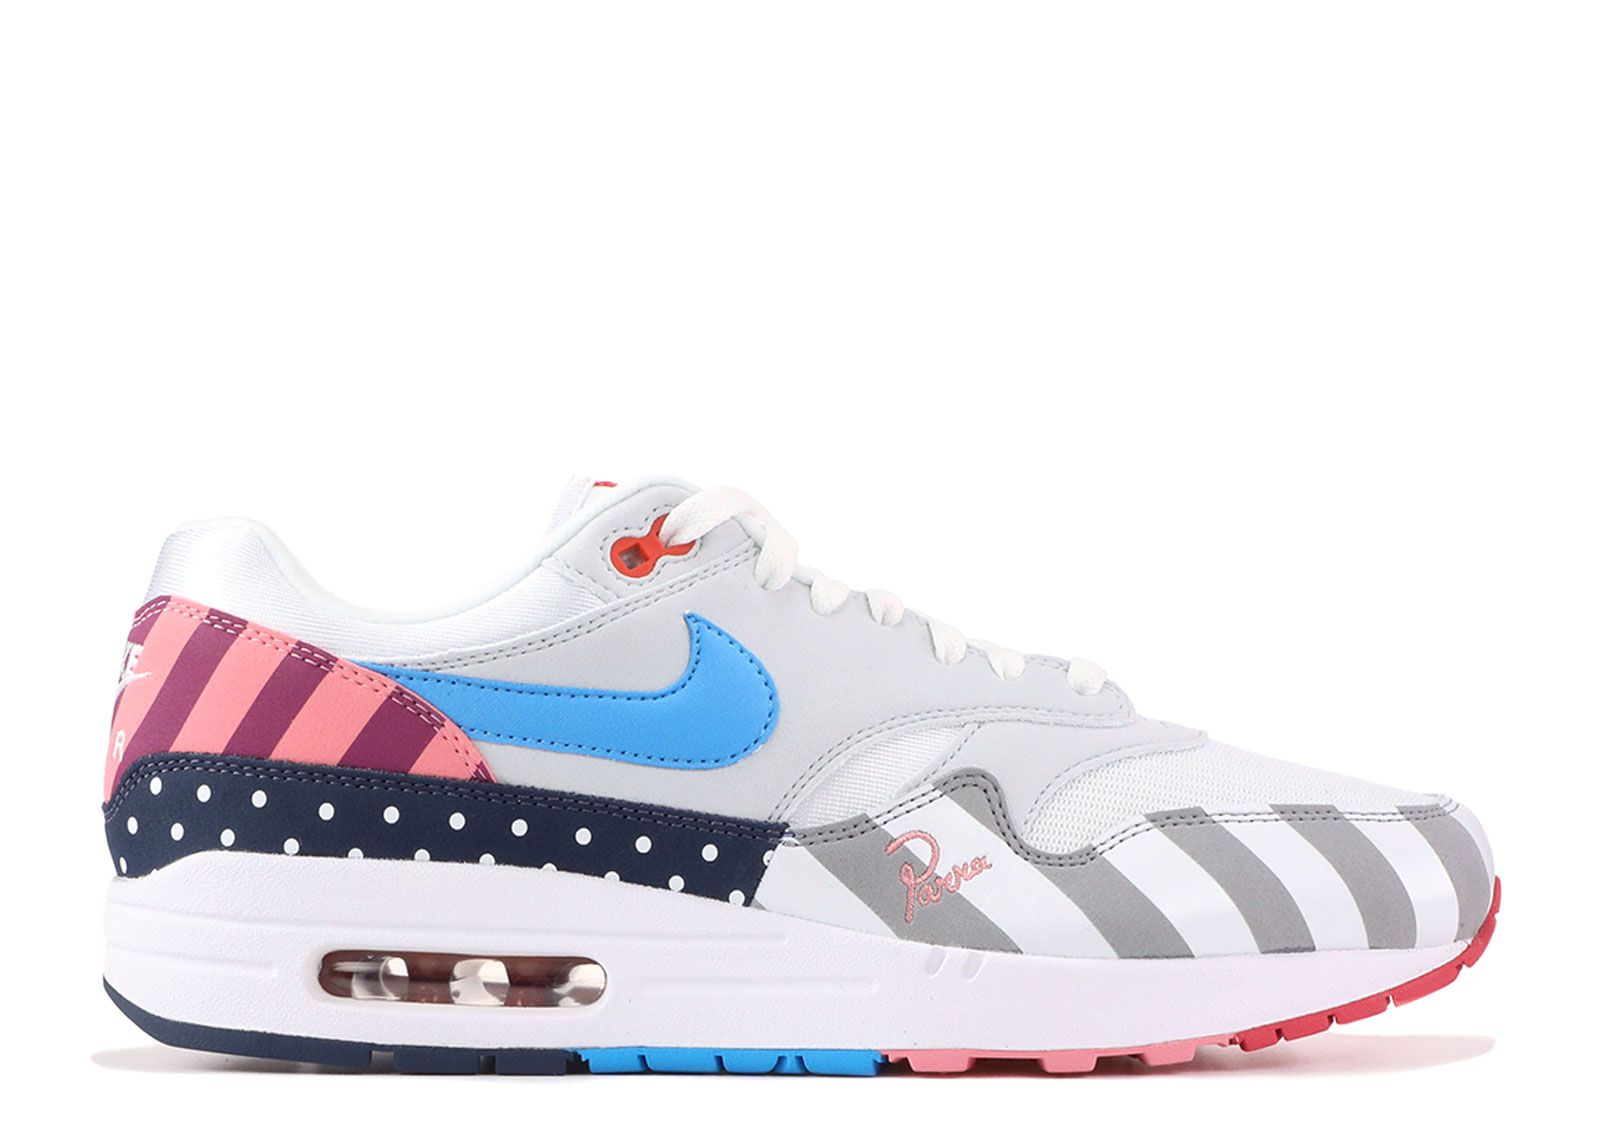 Кроссовки Nike Parra X Air Max 1, белый stussy x nike air zoom spiridon cage 2 men women running shoes breathable outdoor sports sneakers mens trianers eur 36 45